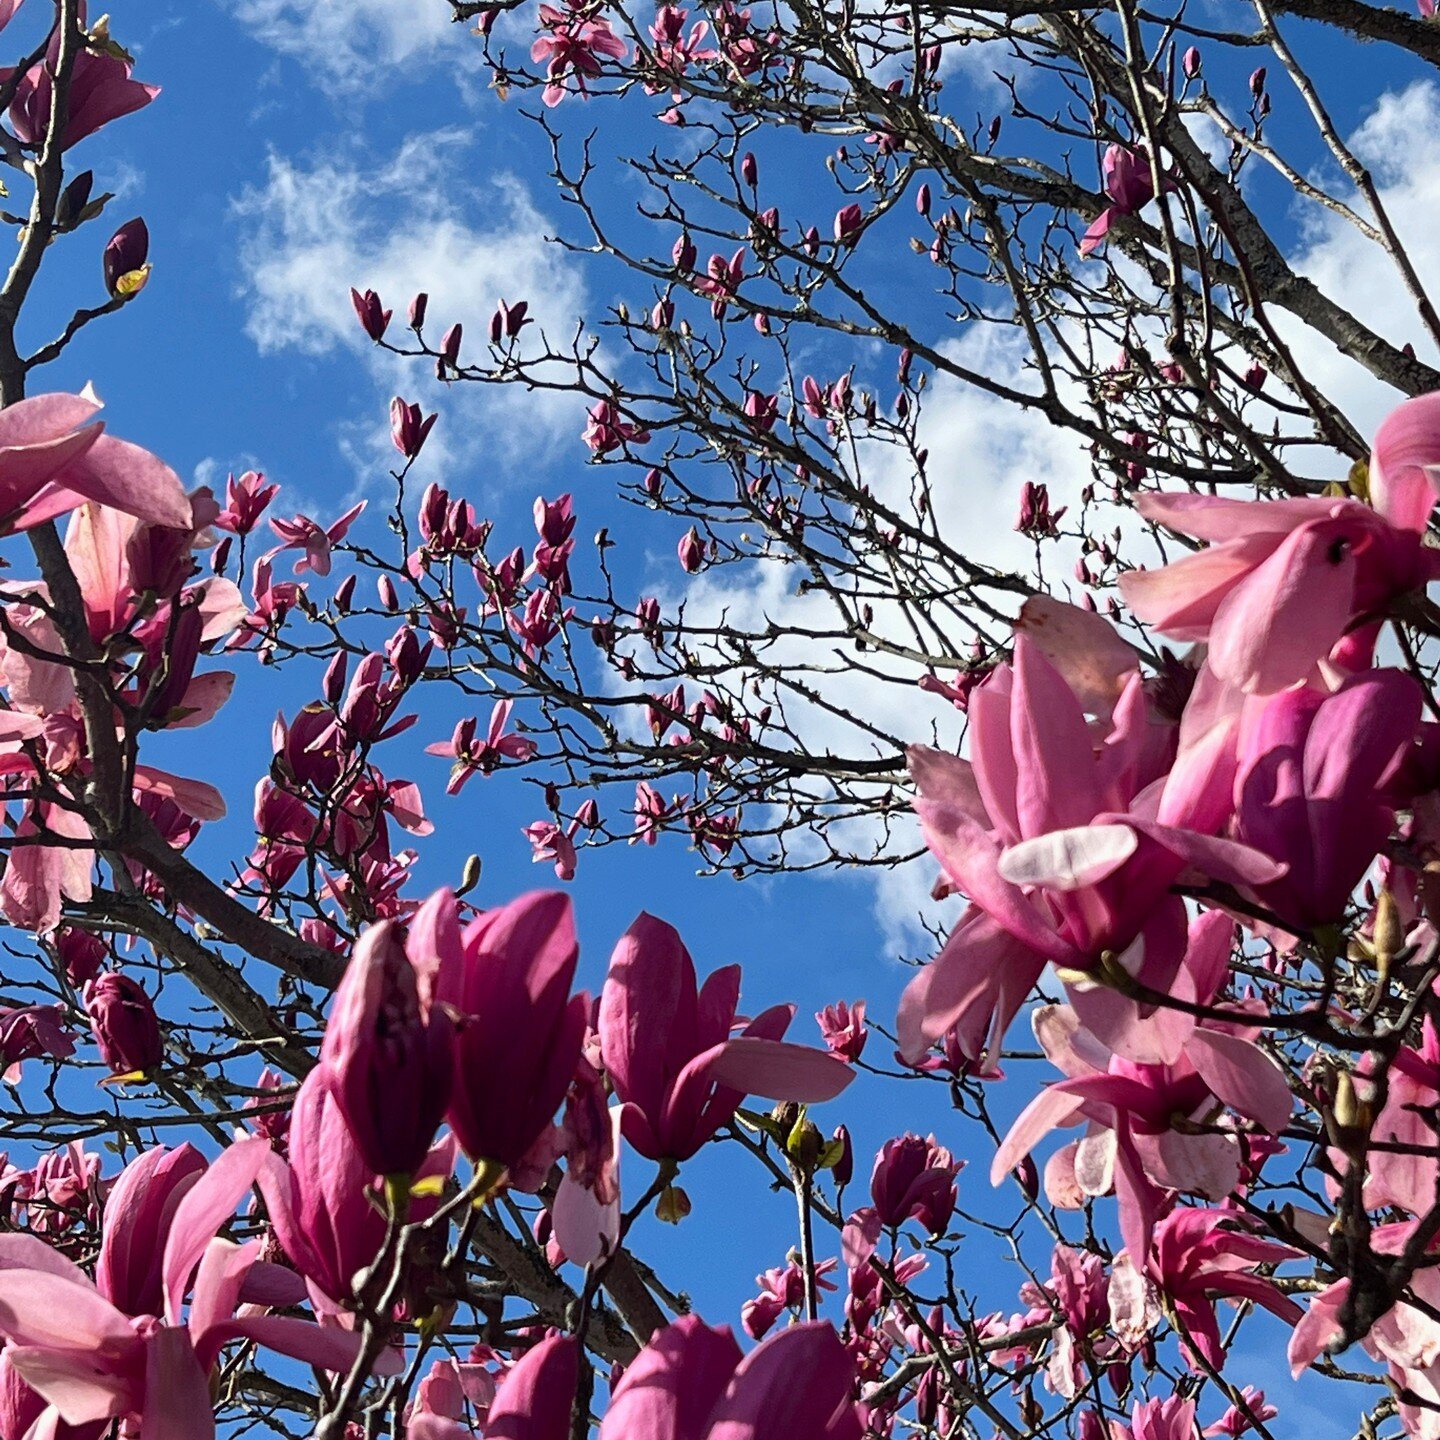 Laurie from @lauriejknits sent me a photo today of magnolias at her home in upstate New York. It reminded me of this beautiful magnolia tree that was near our house when we lived in #portlandoregon 

They are my absolute favorite flowers, and I love 